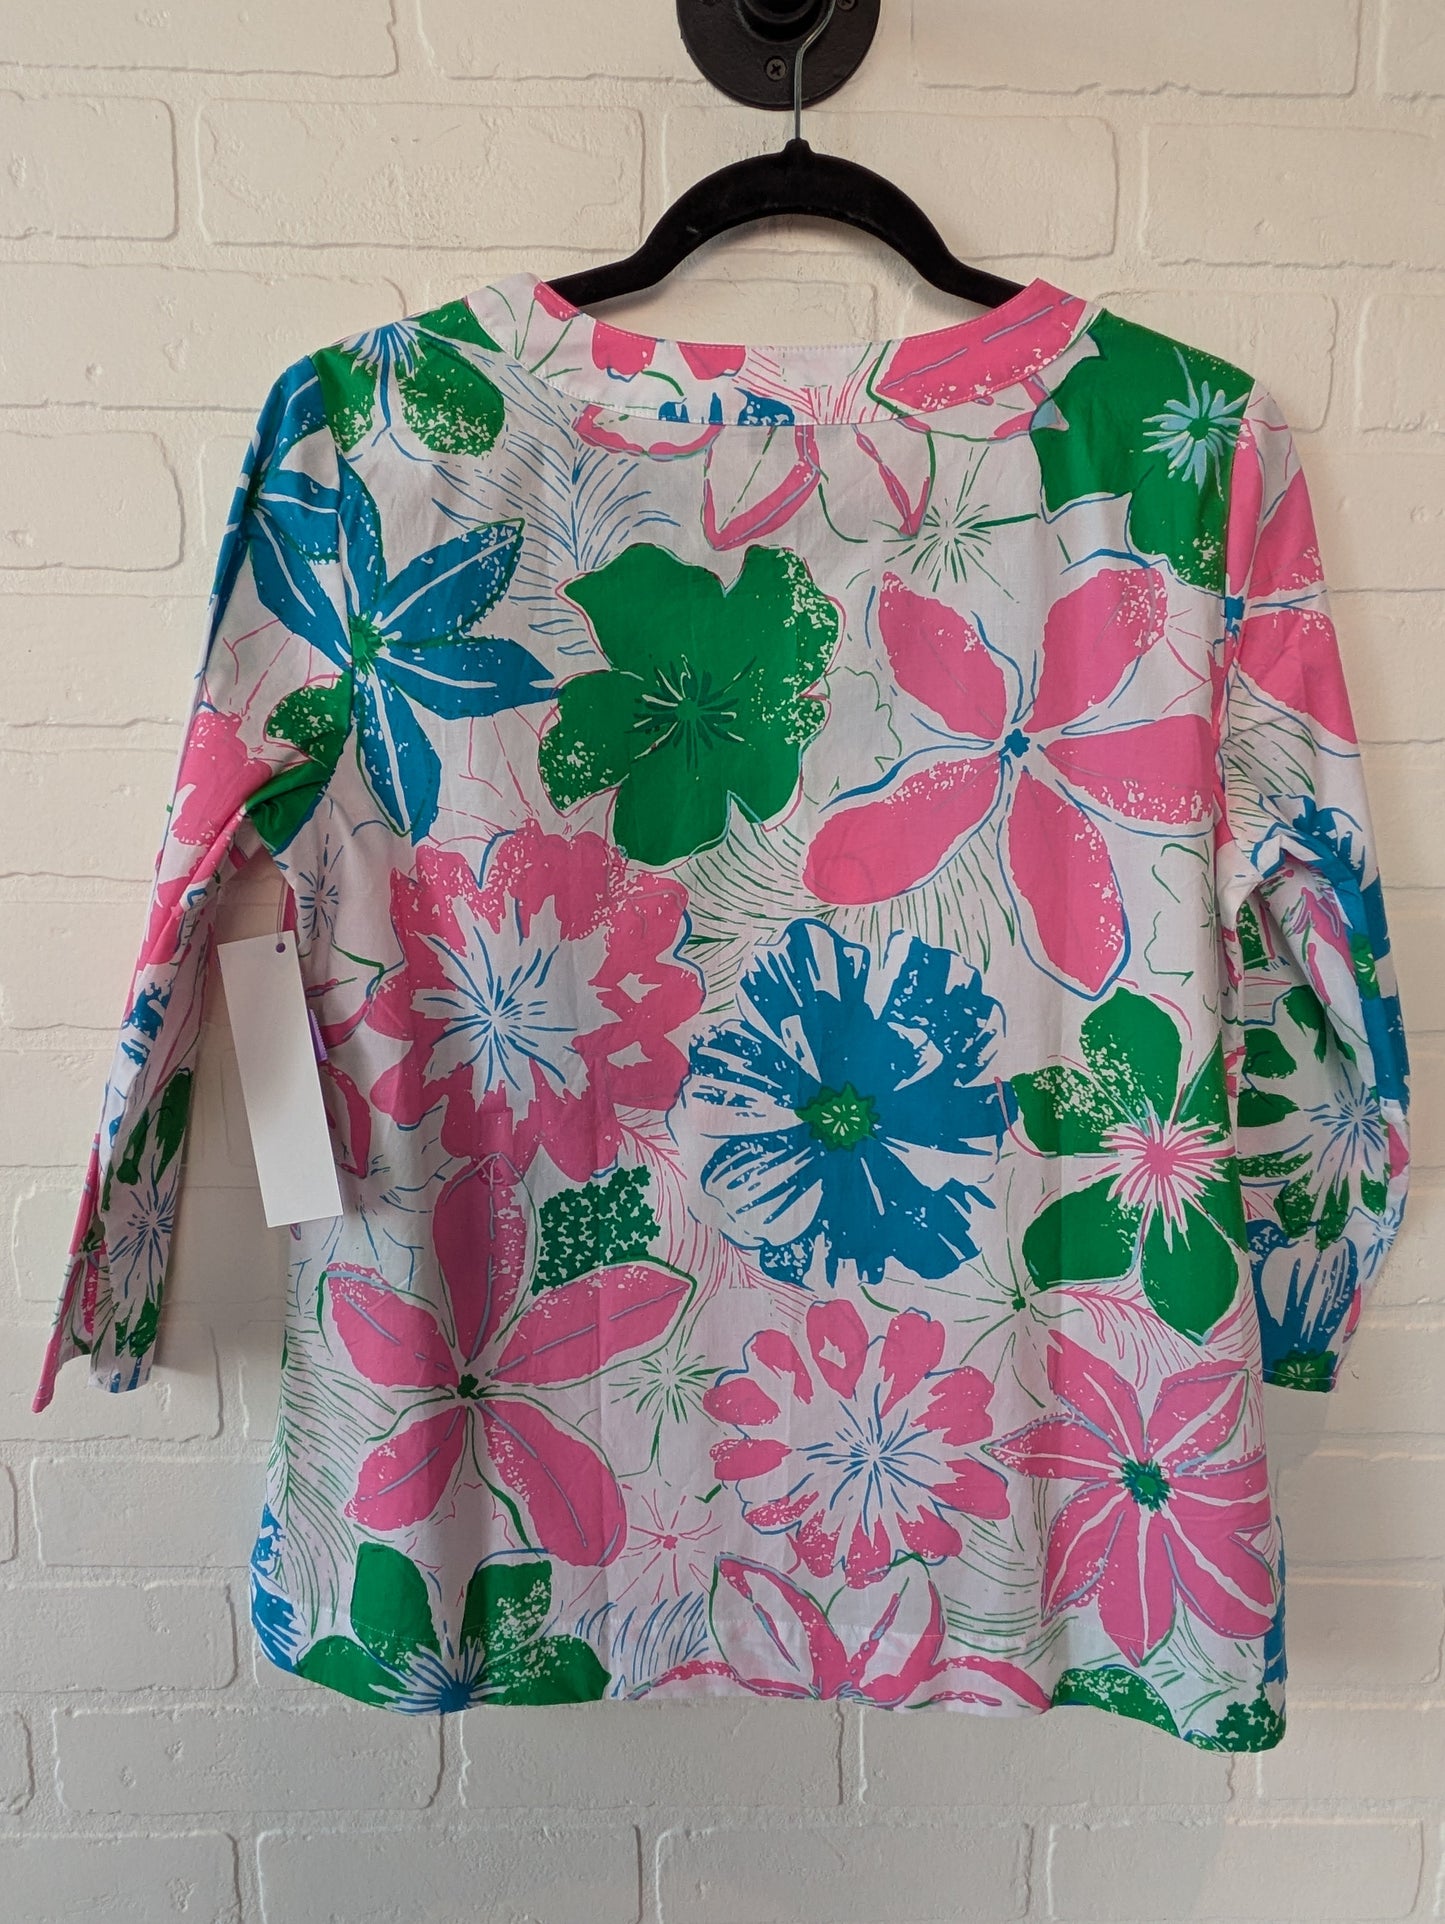 Blue & Green Top 3/4 Sleeve Talbots, Size M